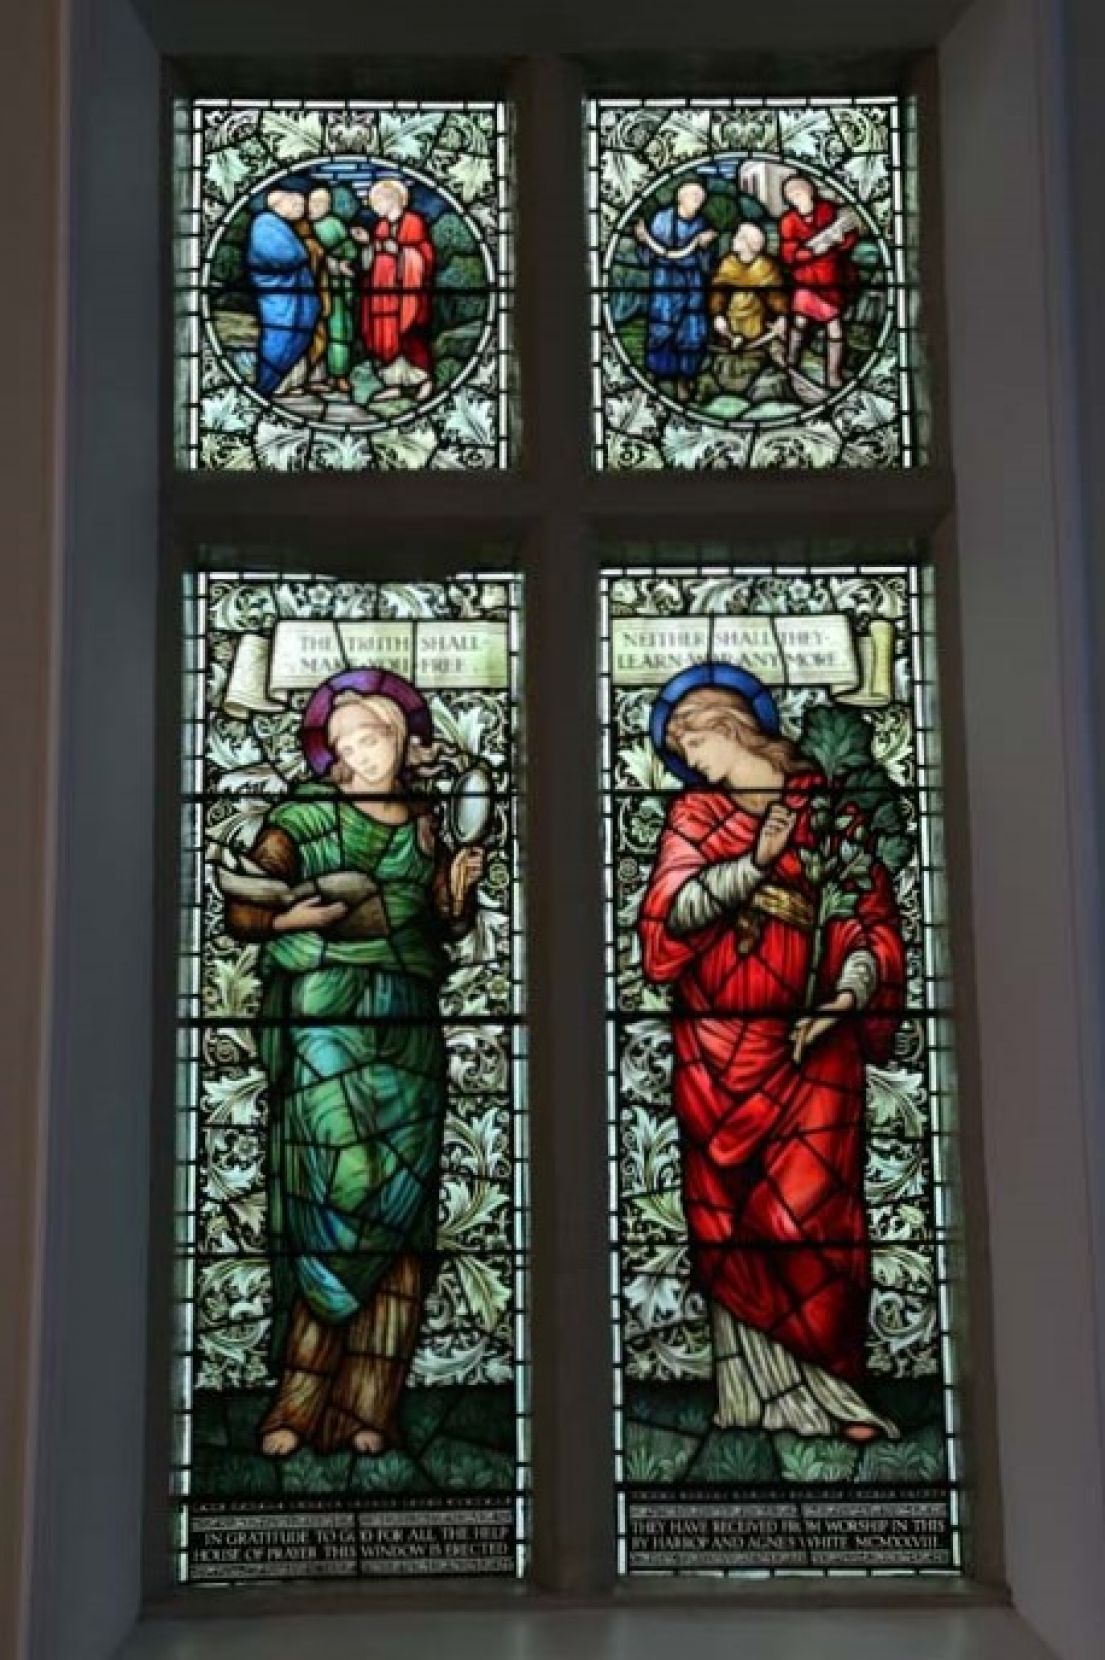 A total of four stained glass windows depicting saints. The top two images are square the bottom too are long windows.